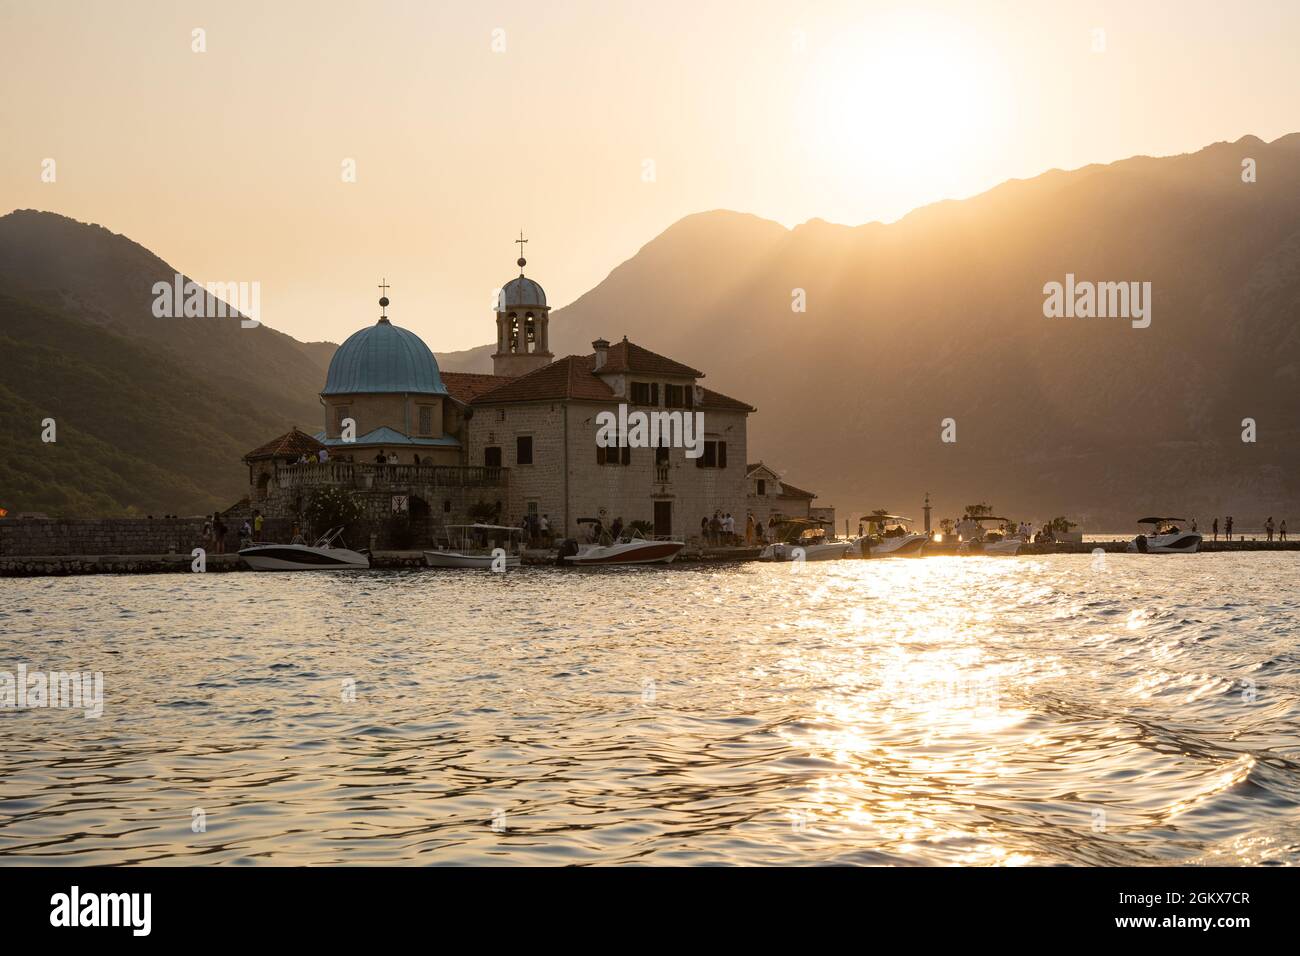 Our lady of the rocks, Perast, Montenegro Stock Photo